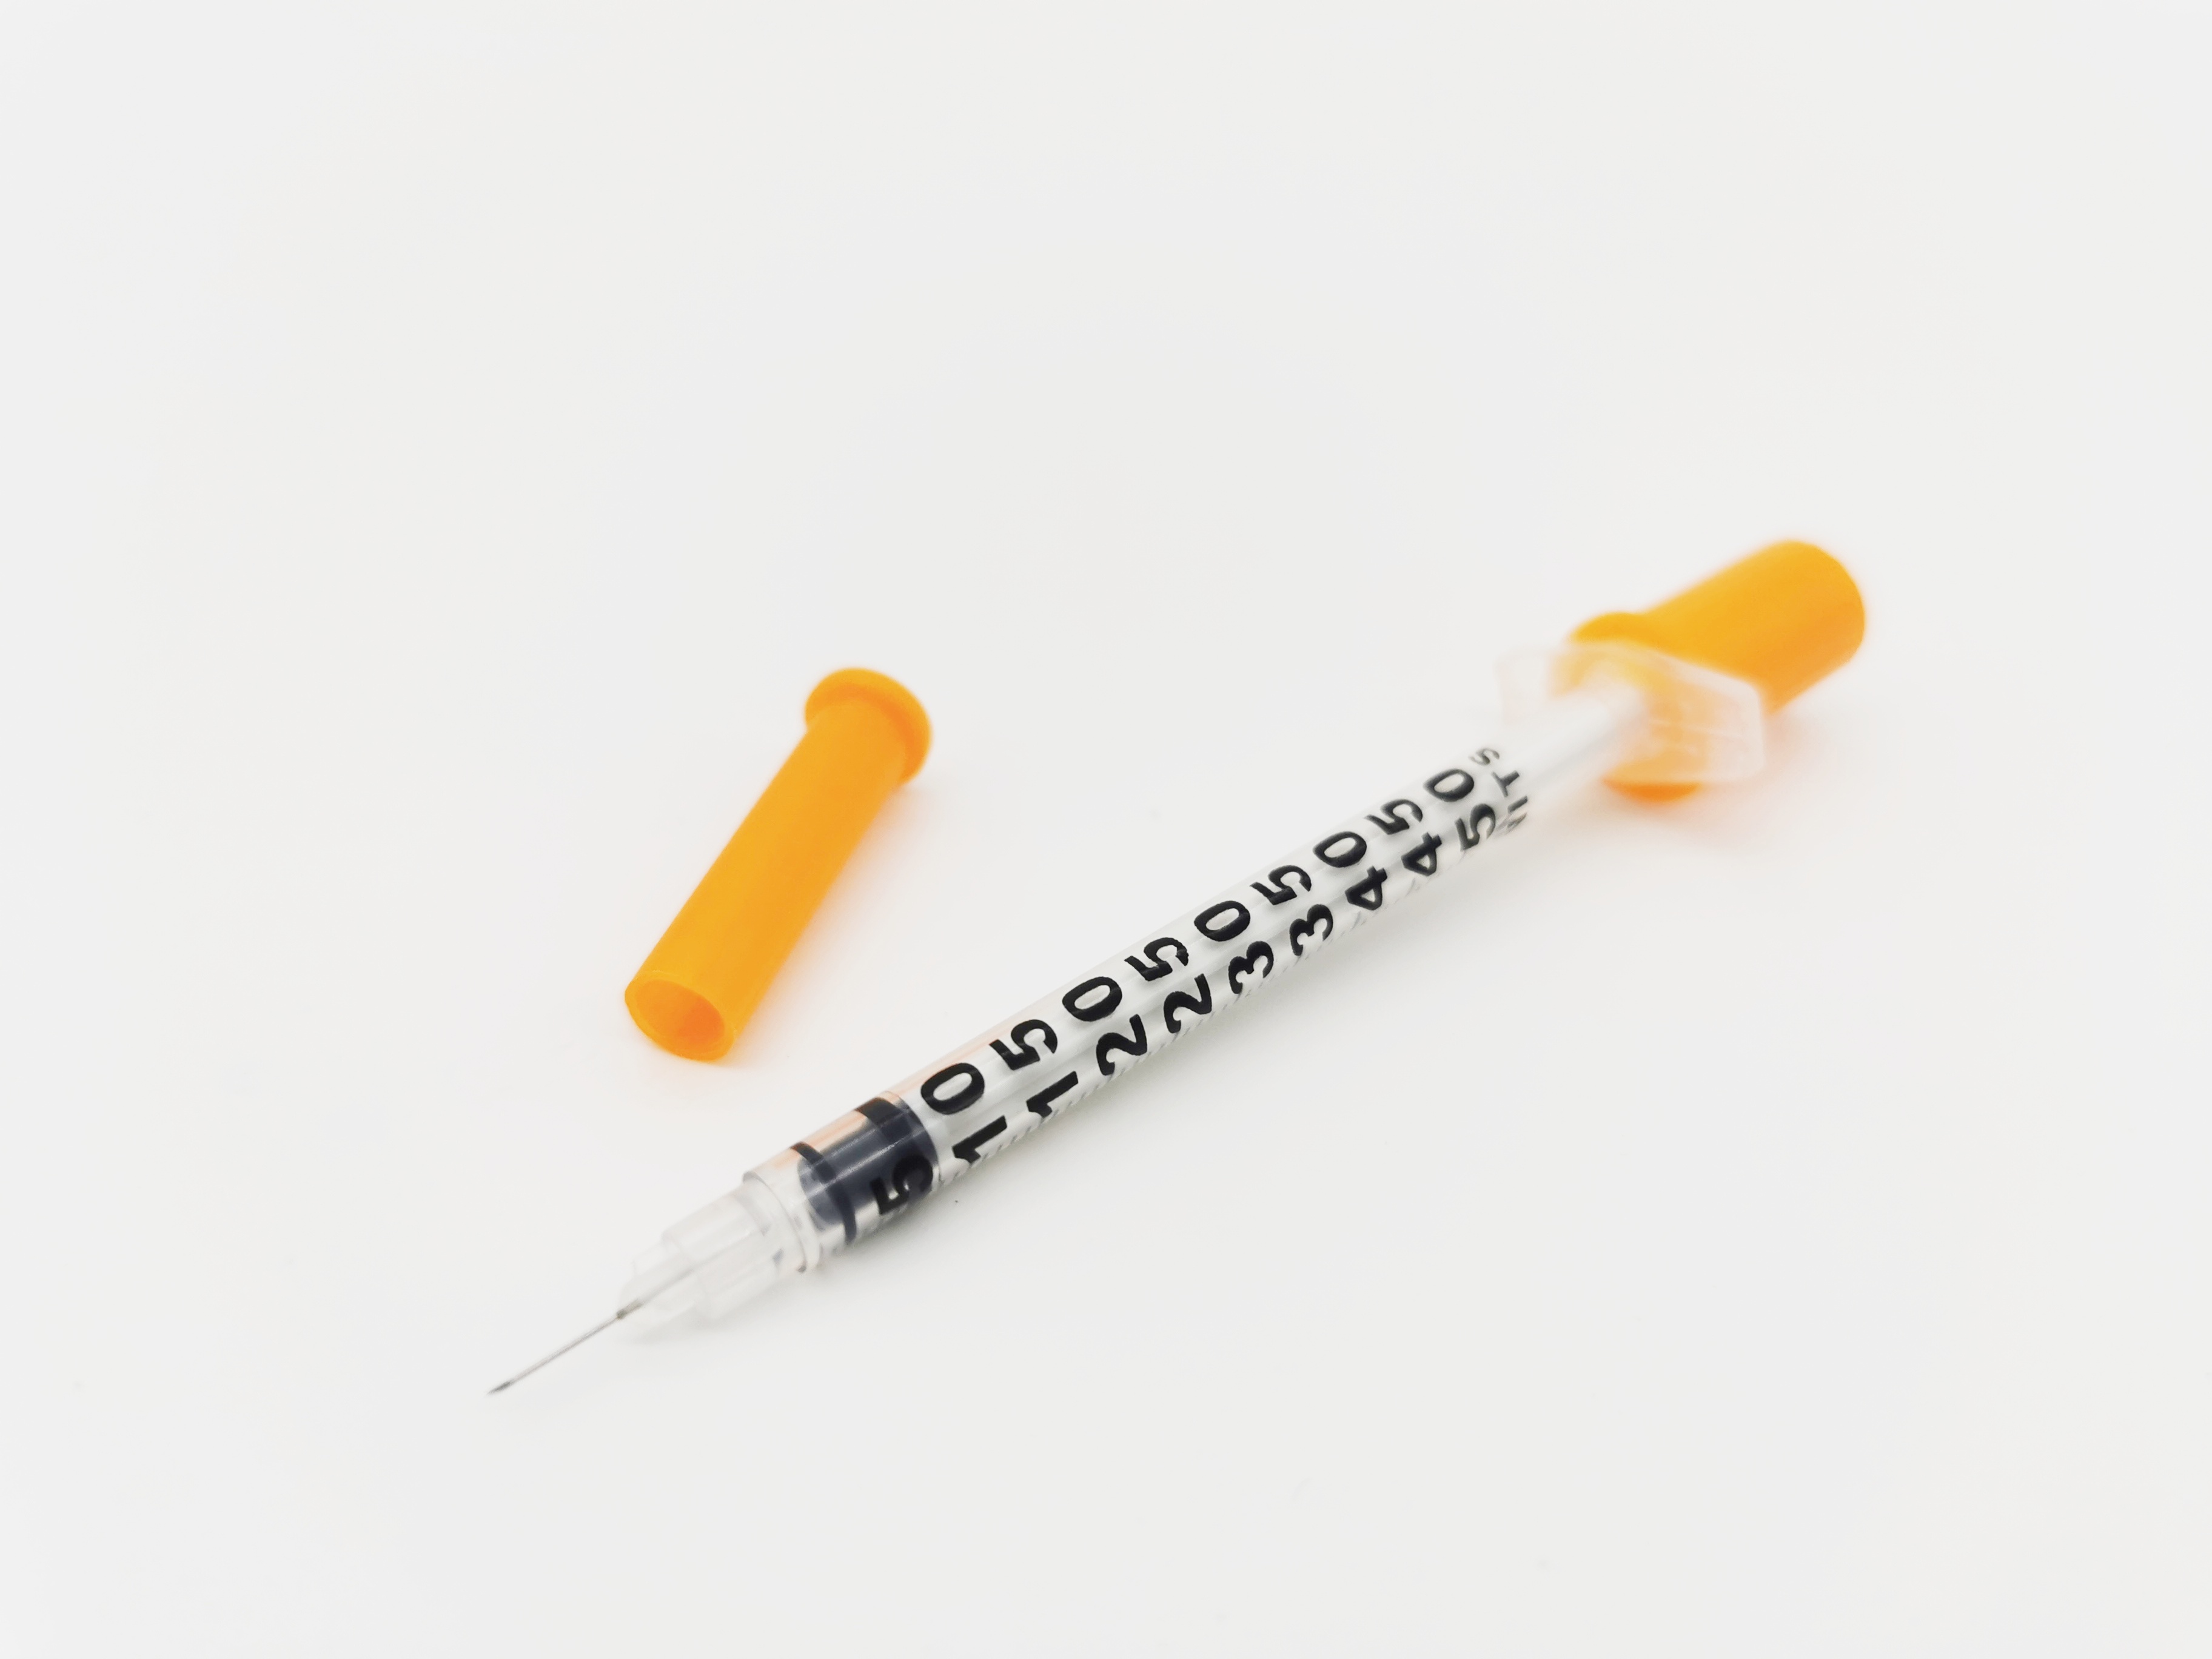 How to use insulin syringe?